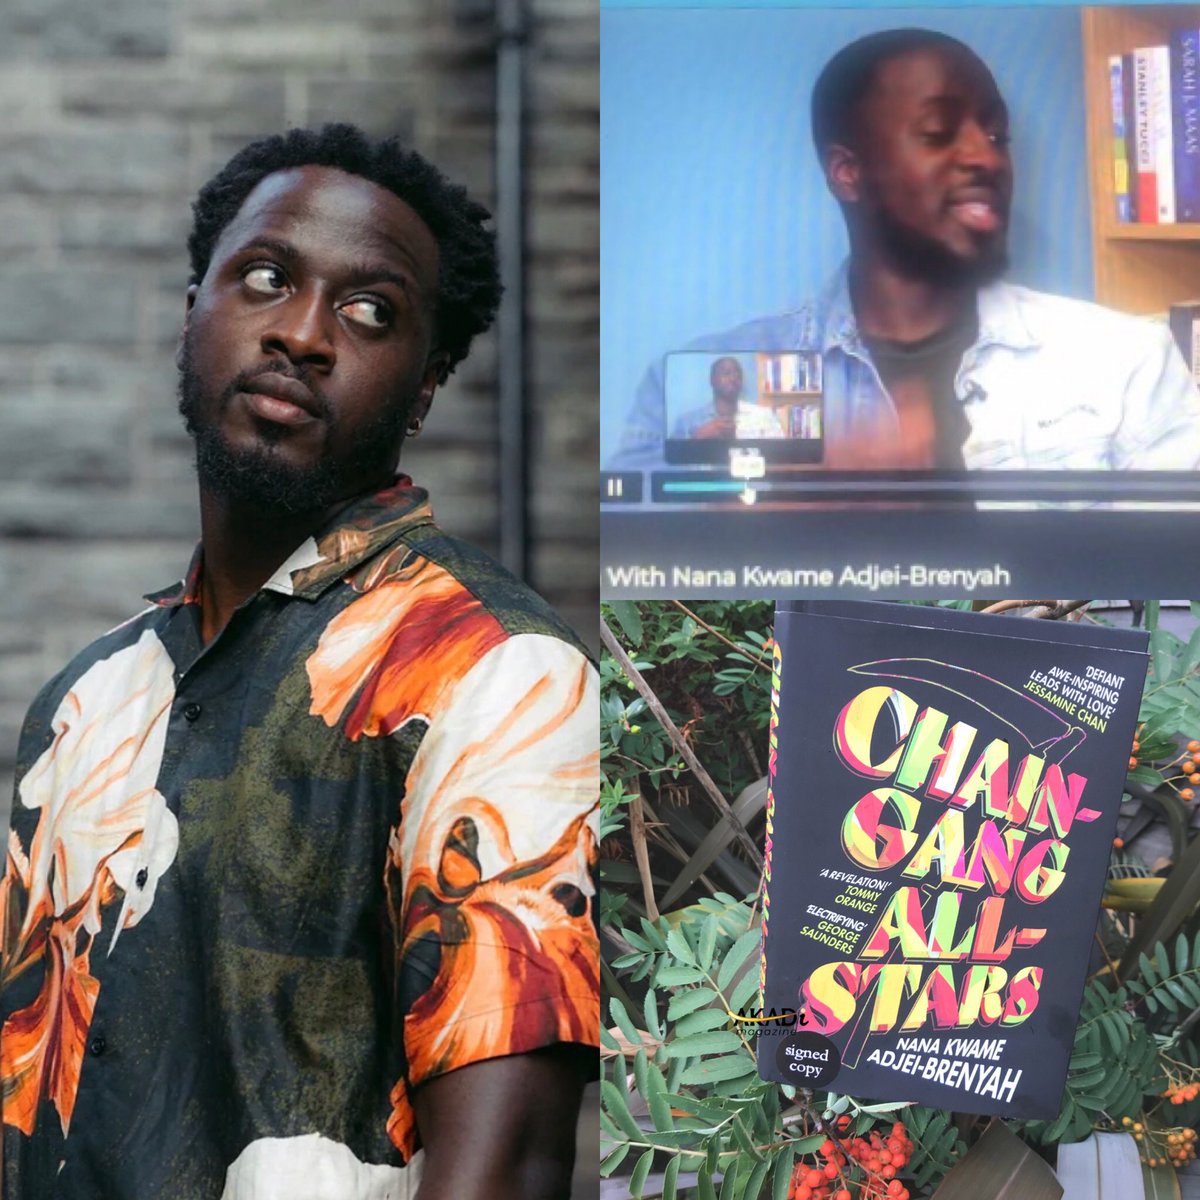 Nana Kwame Adjei-Brenyah's book #ChainGangAllStars zeros in on the USA’s carceral state, challenges us to explore the roots of the country’s prison policies and its impact on society.

@NK_Adjei @the_faneonline 

akadimagazine.com/post/chain-gan…